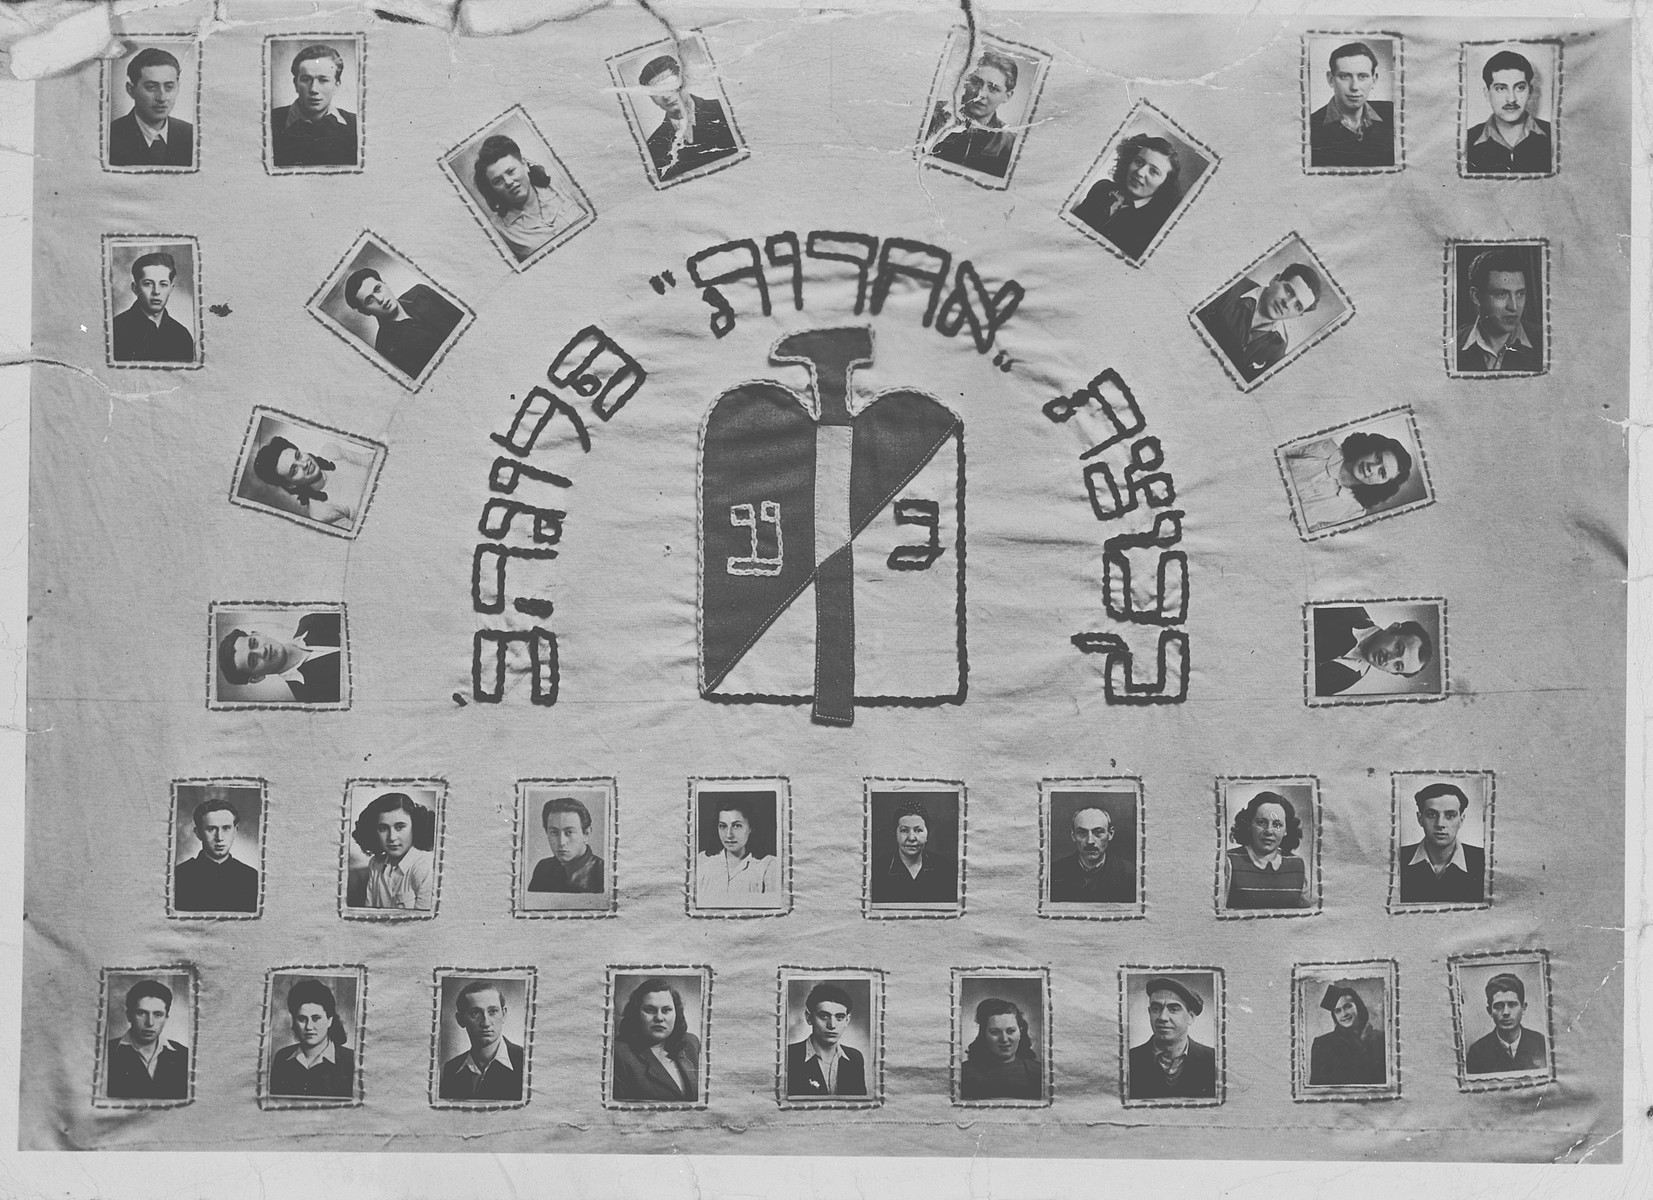 Composite picture of the members of the religious Zionist youth movement, Bnai Akiva, in the Foehrenwald displaced persons' camp.

Pictured on the far right, second from the top is Avram Melamed who later became a member of the Israeli parliament.